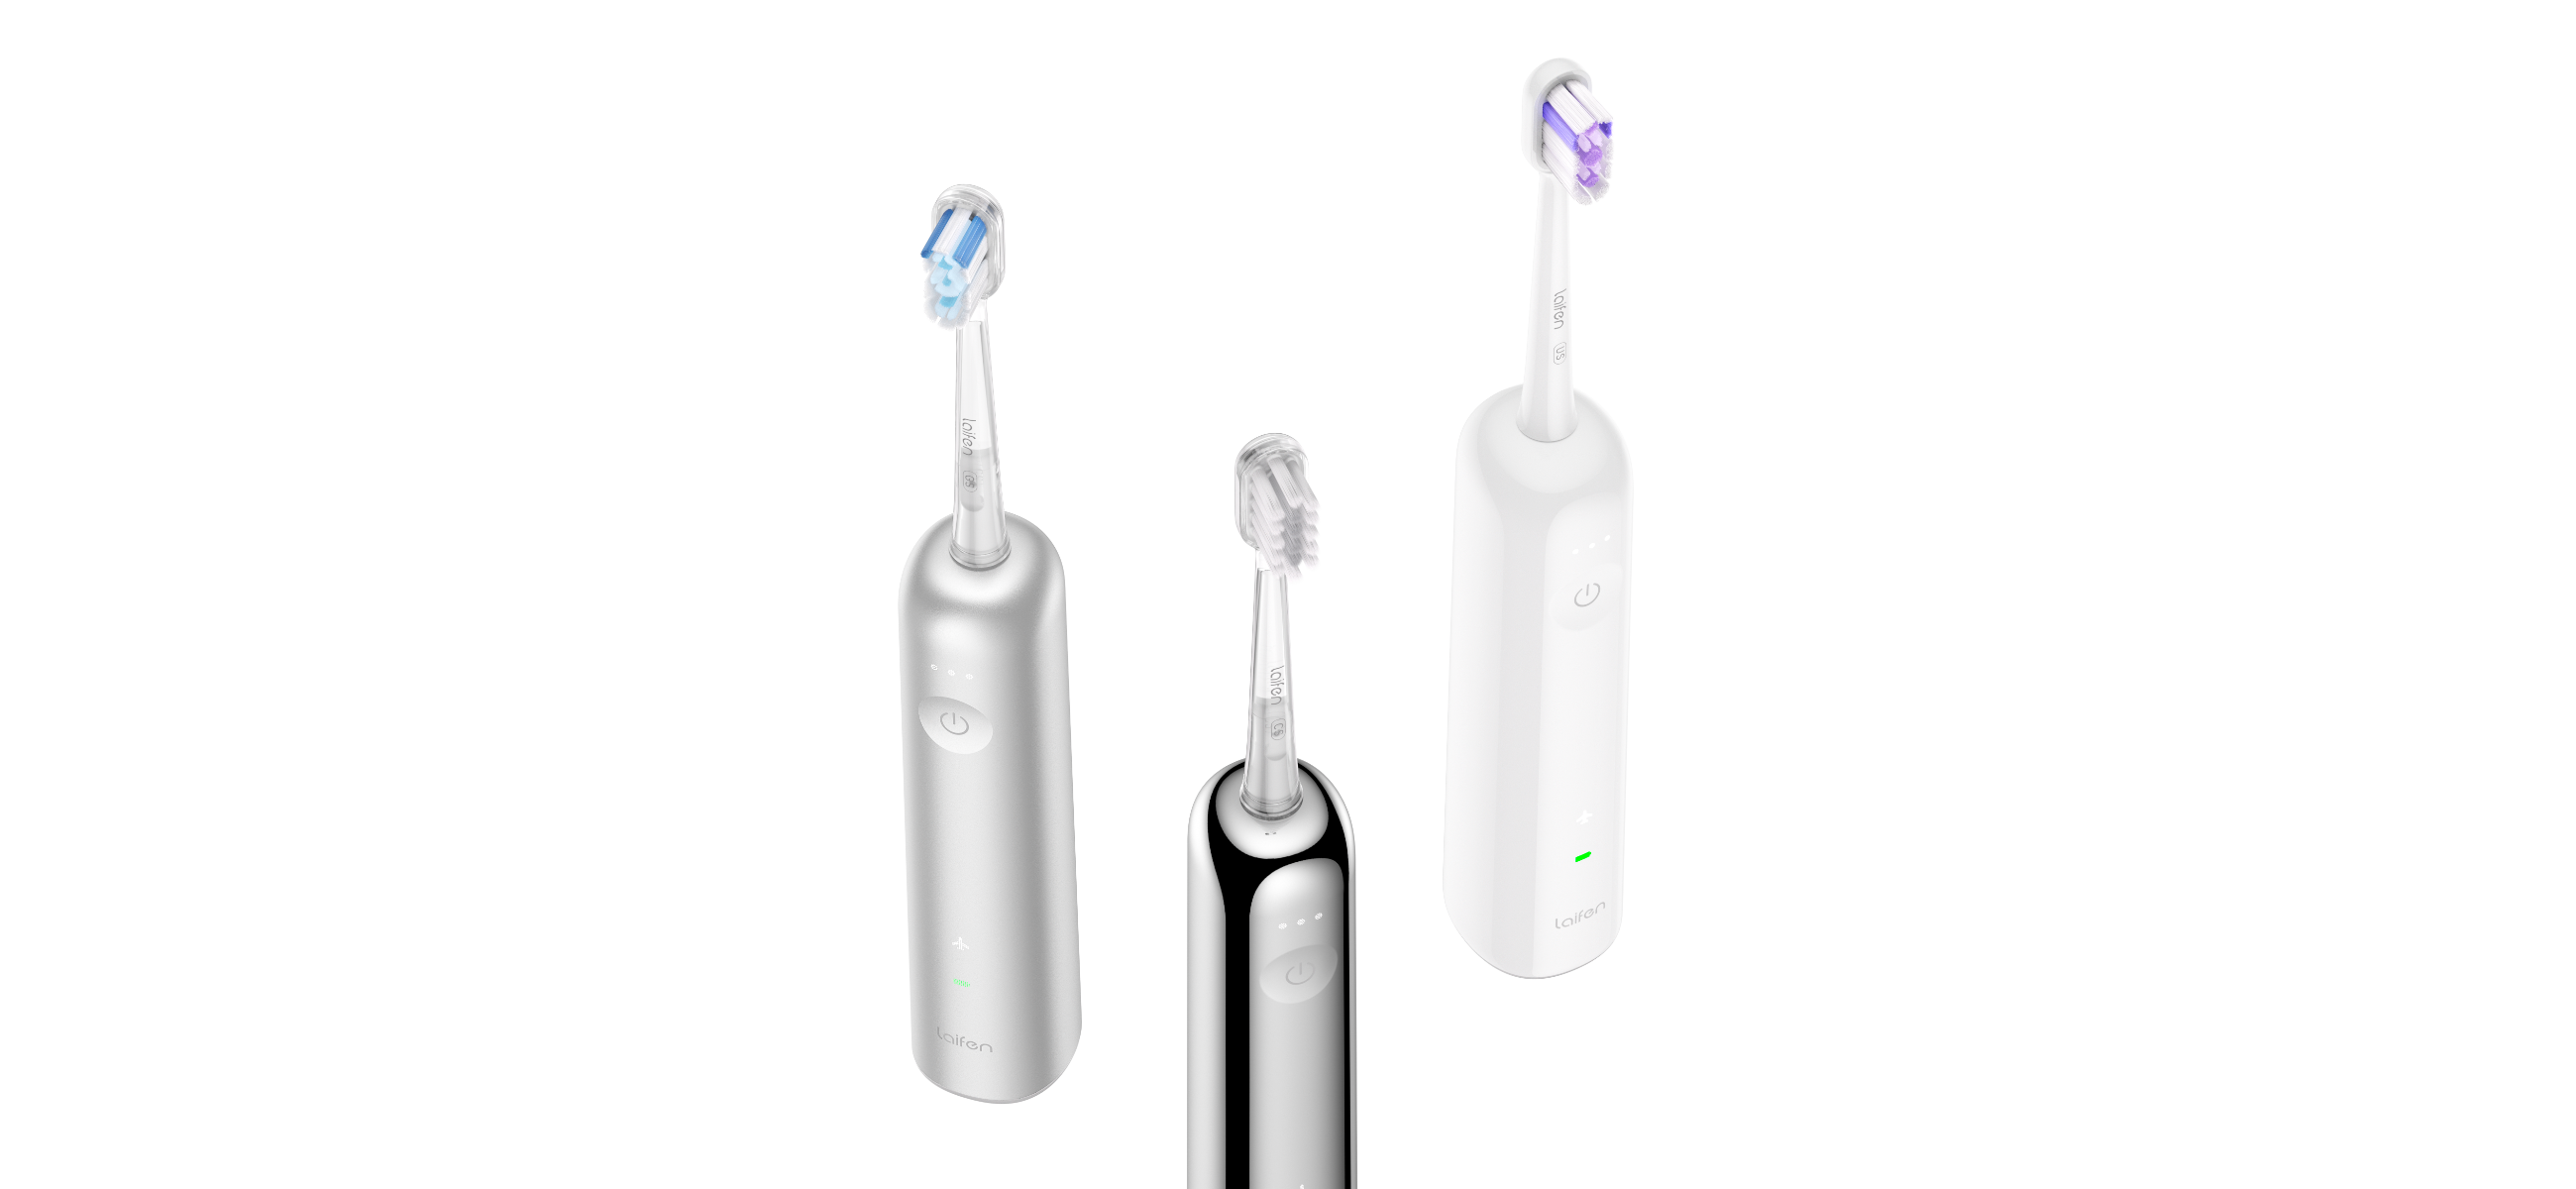 Sonic vs. Oscillating electric toothbrush: A complete comparison